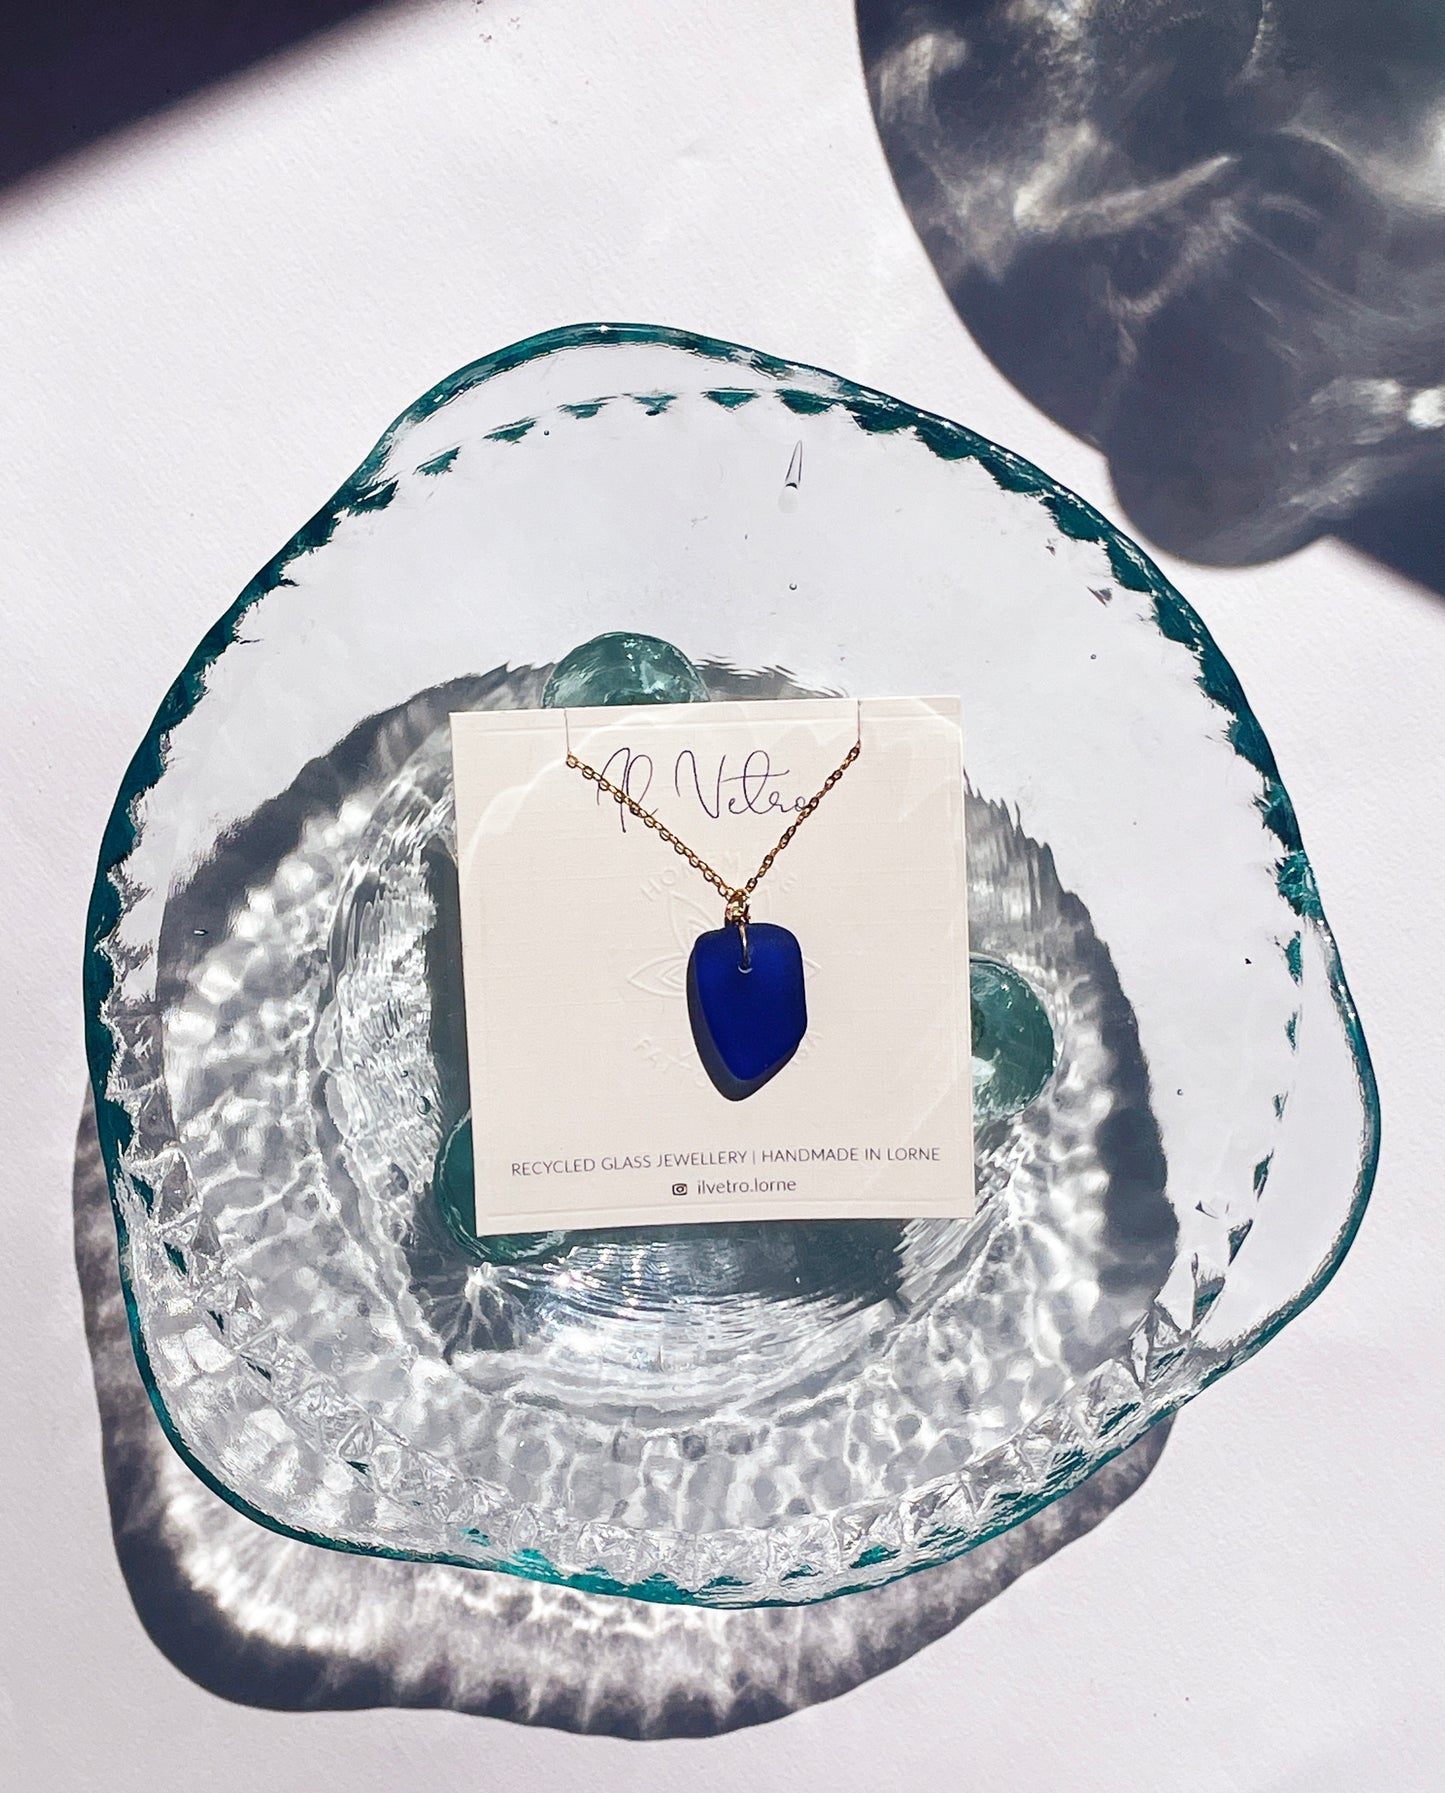 Authentic Dark Blue Sea-Glass Pendant Necklace with 14k Gold Filled Chain | Handmade and Unique